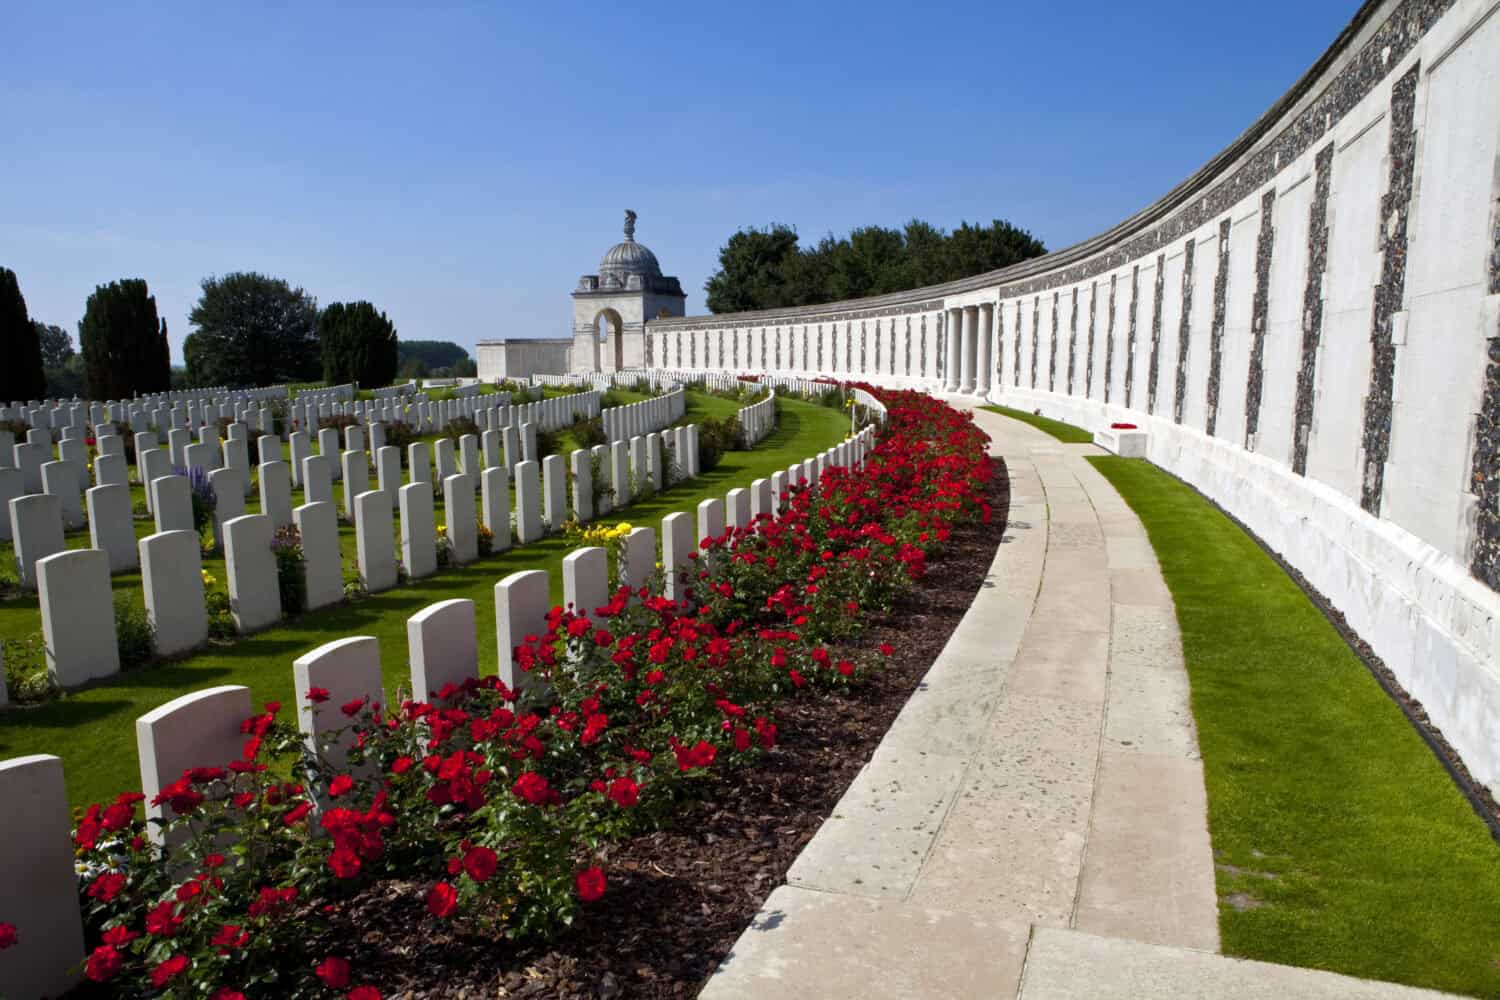 Tyne Cot Cemetery in Ypres, Belgium. Tyne Cot Commonwealth War Graves Cemetery and Memorial to the Missing is a Commonwealth War Graves burial ground for the dead of the First World War in the Ypres.